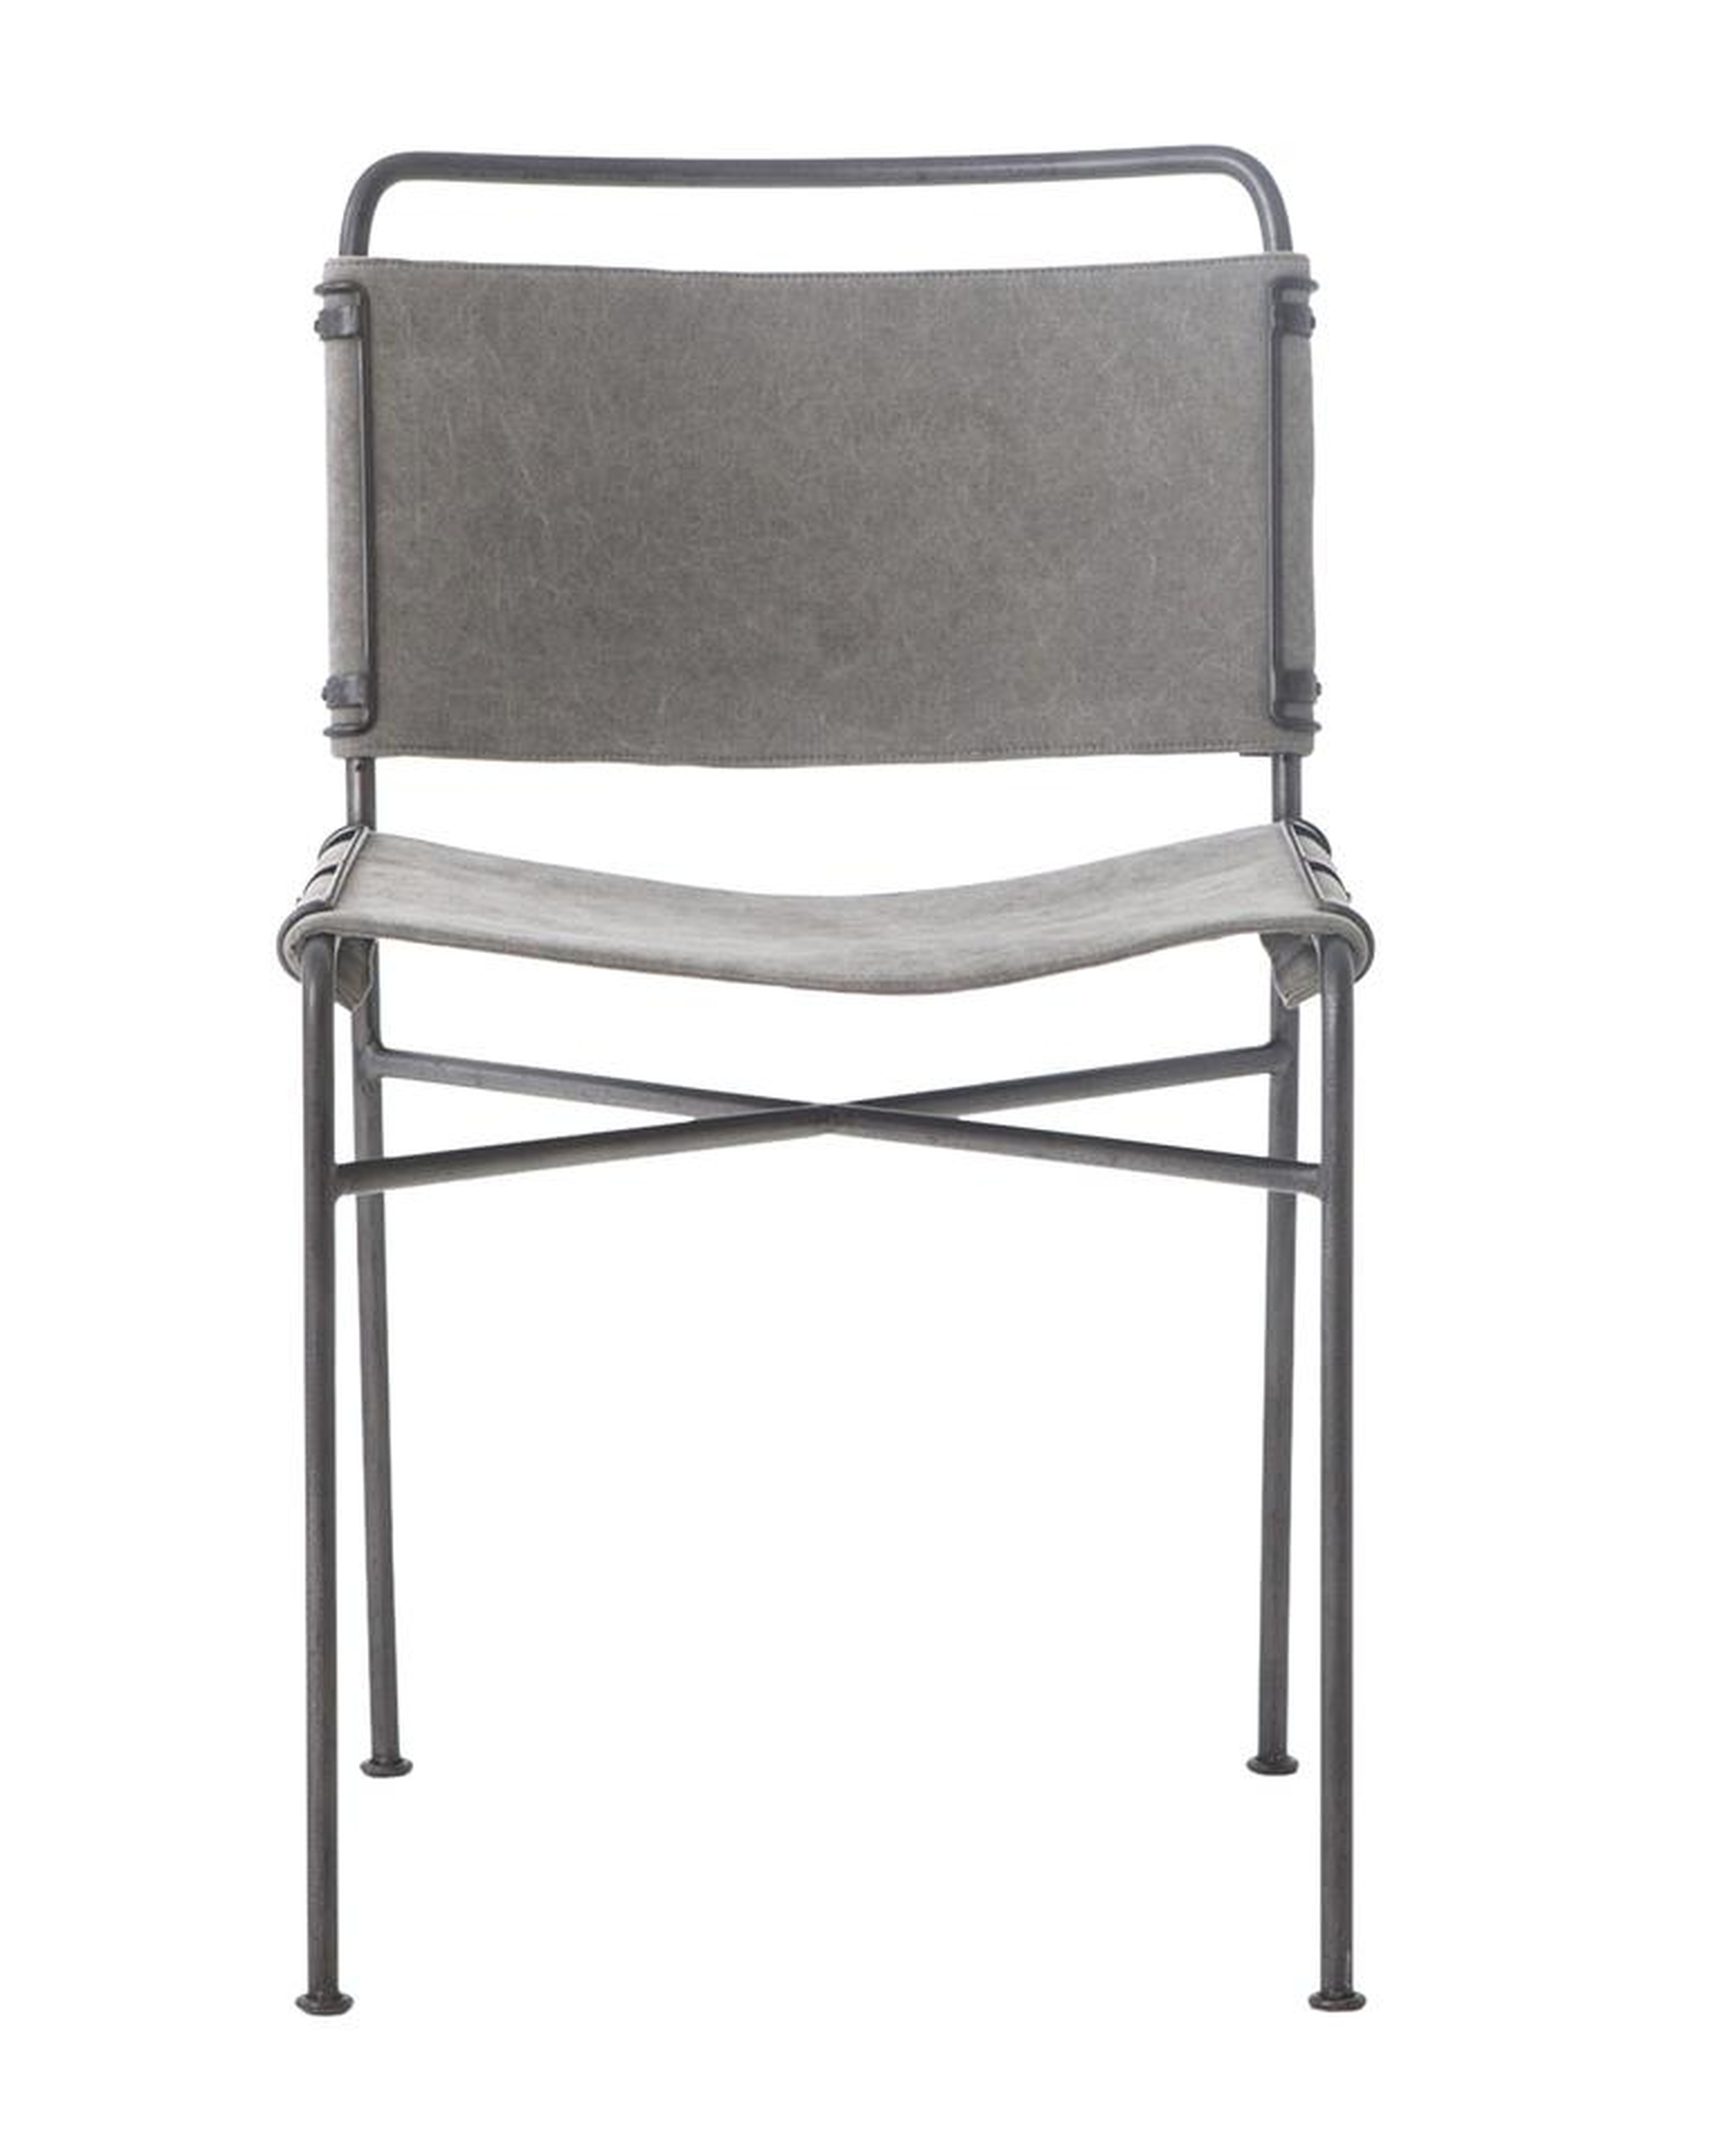 MOORE CHAIR, STONEWASH GRAY - McGee & Co.